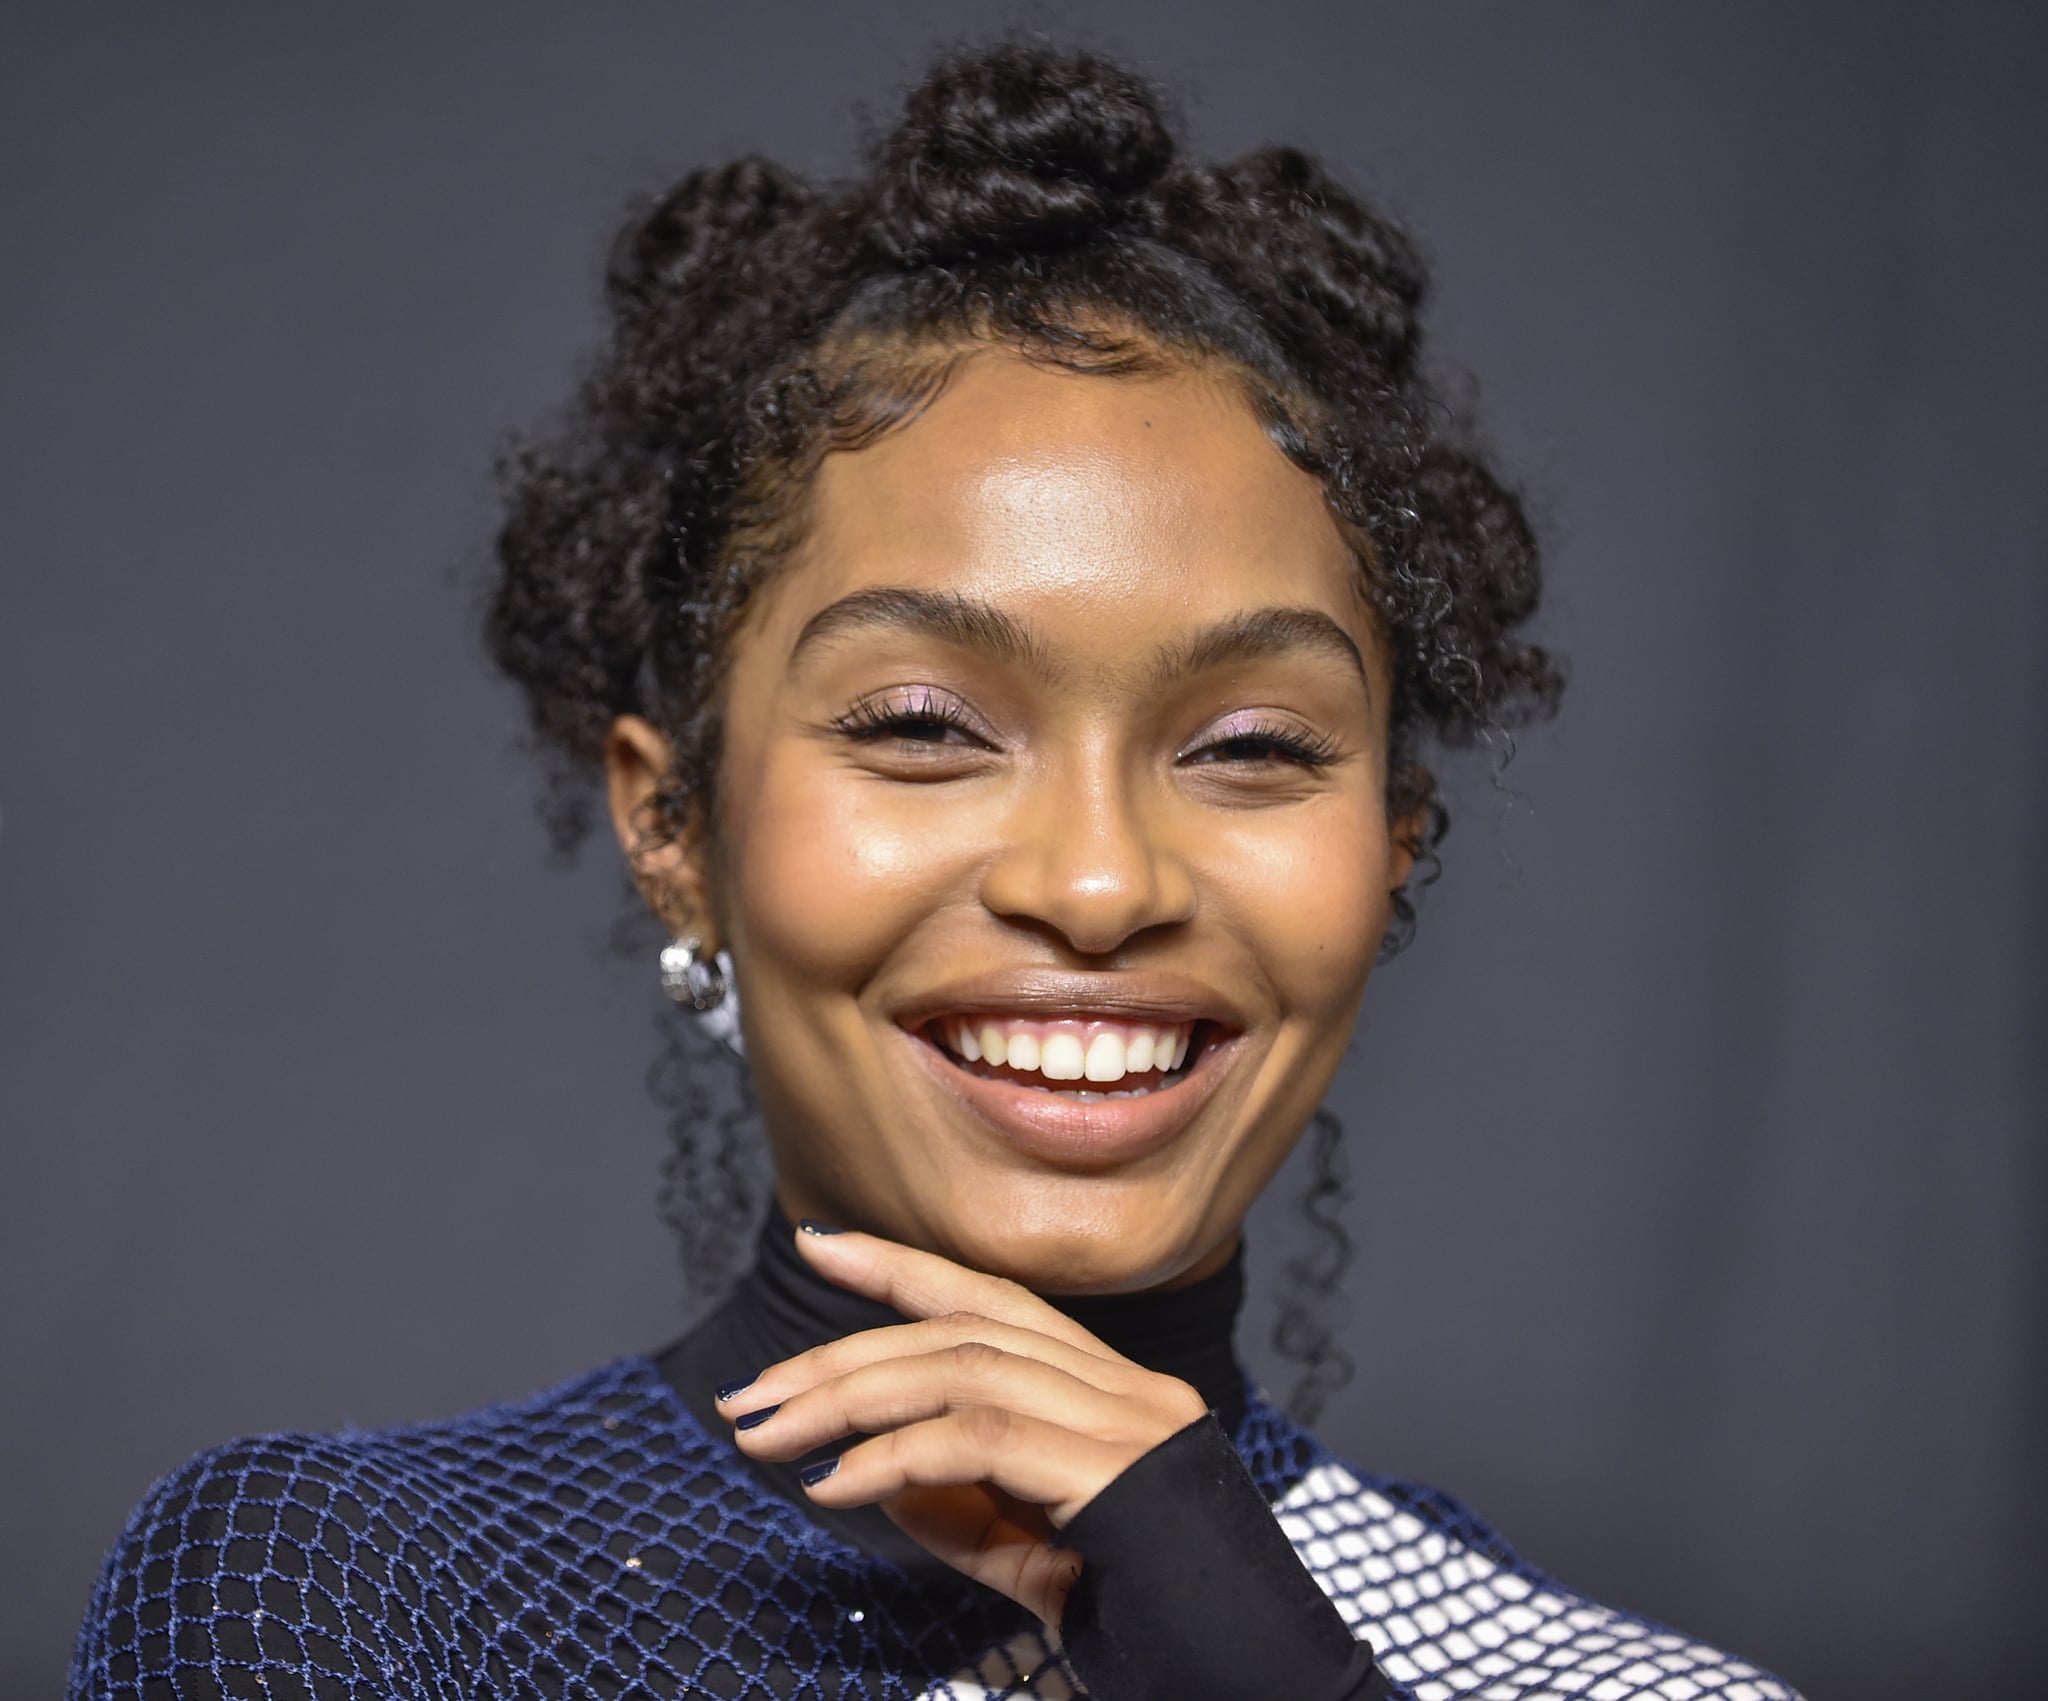 15 Bantu Knot Hairstyles to Try for Protective Style Season